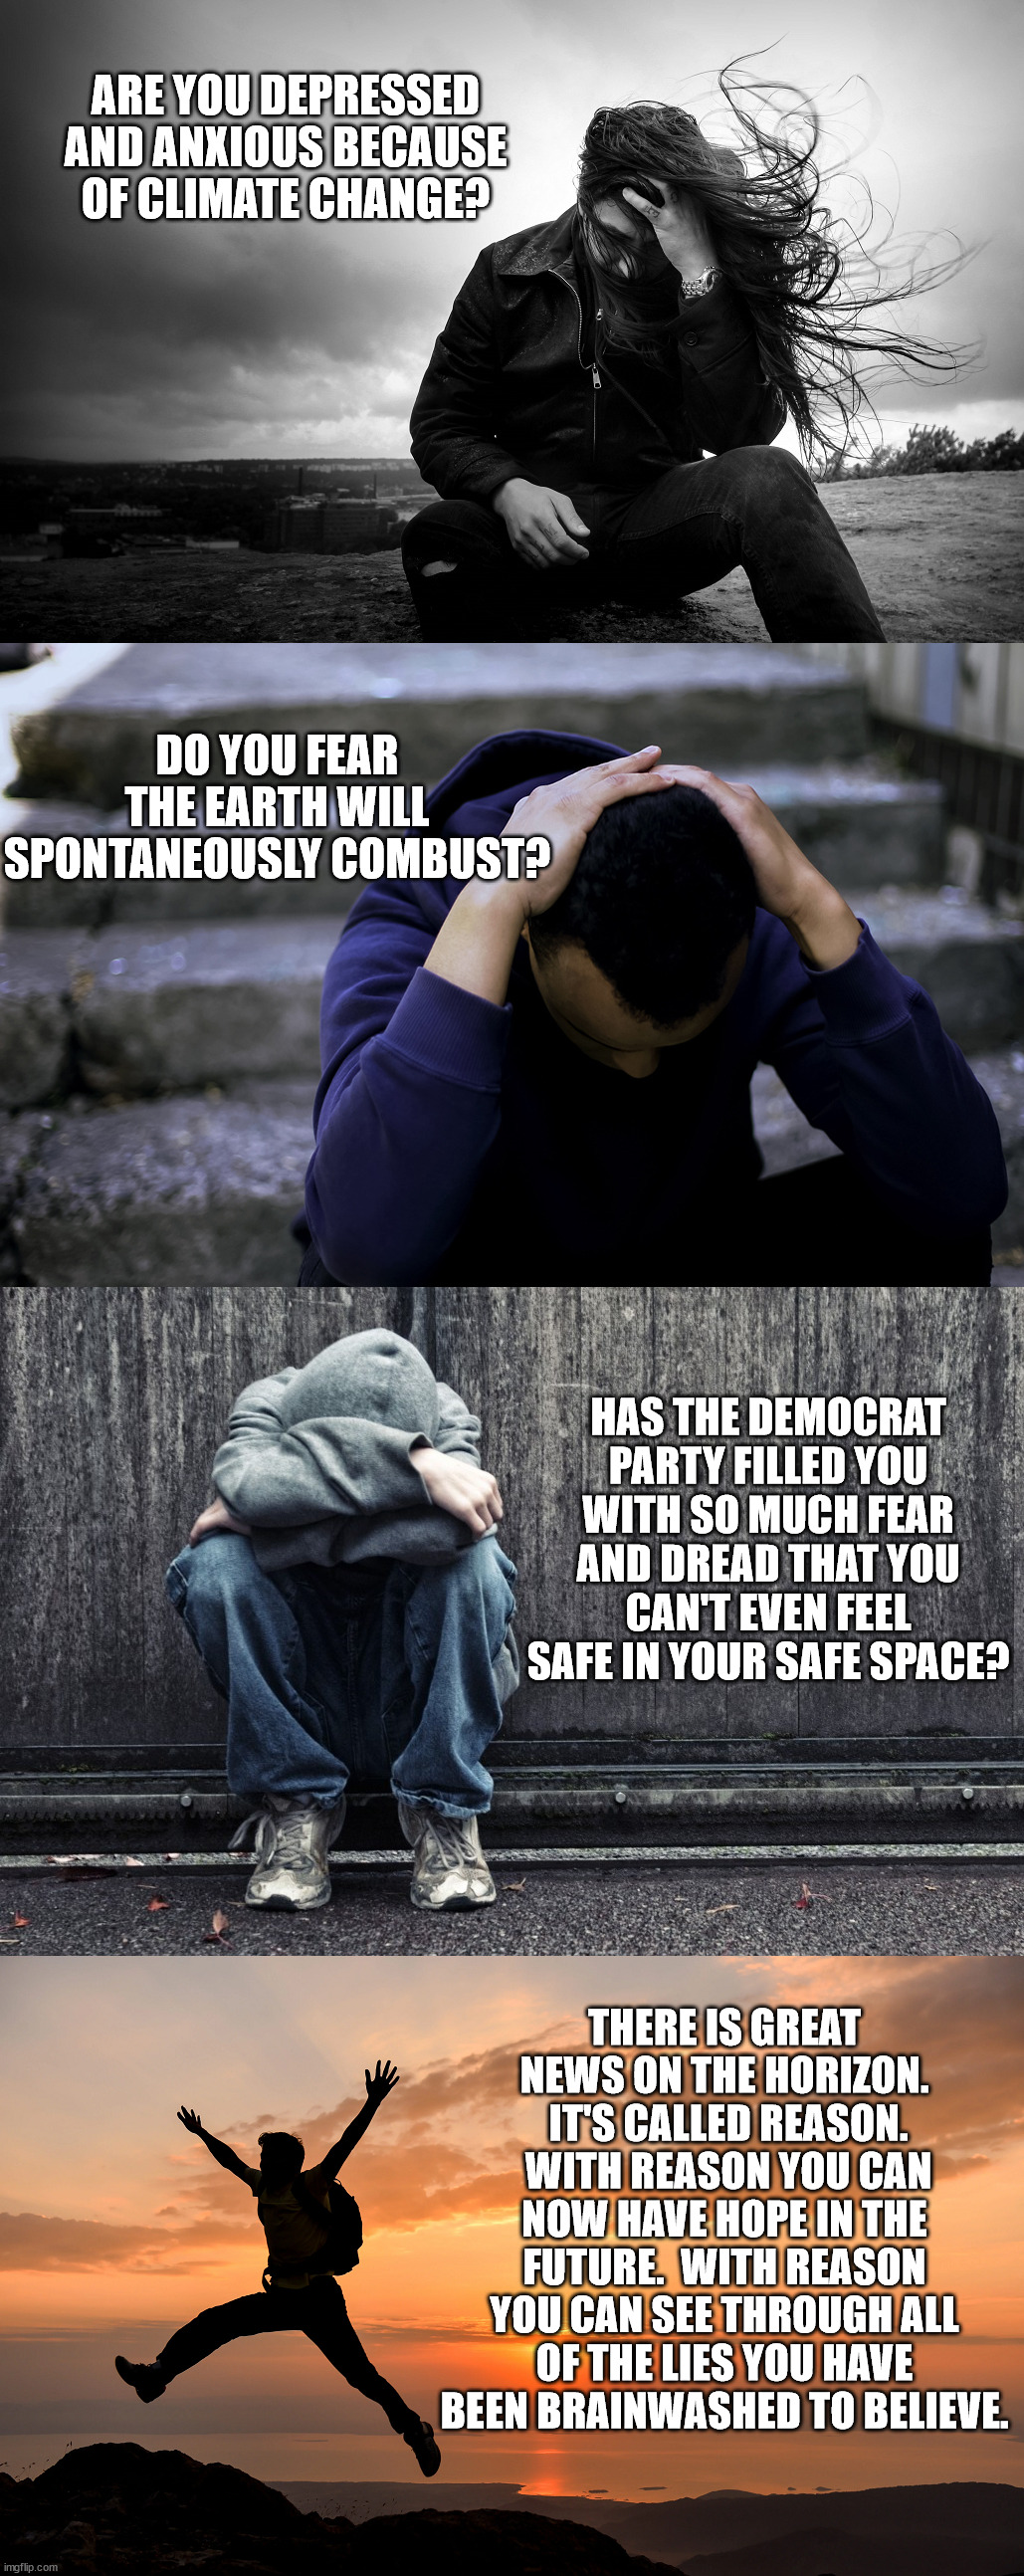 Reason, logic and common sense will end the stupidity.  Your brain has atrophied, it will hurt at first but it gets better. | ARE YOU DEPRESSED AND ANXIOUS BECAUSE OF CLIMATE CHANGE? DO YOU FEAR THE EARTH WILL SPONTANEOUSLY COMBUST? HAS THE DEMOCRAT PARTY FILLED YOU WITH SO MUCH FEAR AND DREAD THAT YOU CAN'T EVEN FEEL SAFE IN YOUR SAFE SPACE? THERE IS GREAT NEWS ON THE HORIZON.  IT'S CALLED REASON.  WITH REASON YOU CAN NOW HAVE HOPE IN THE FUTURE.  WITH REASON YOU CAN SEE THROUGH ALL OF THE LIES YOU HAVE BEEN BRAINWASHED TO BELIEVE. | image tagged in reason,logic,common sense,democrat lies | made w/ Imgflip meme maker